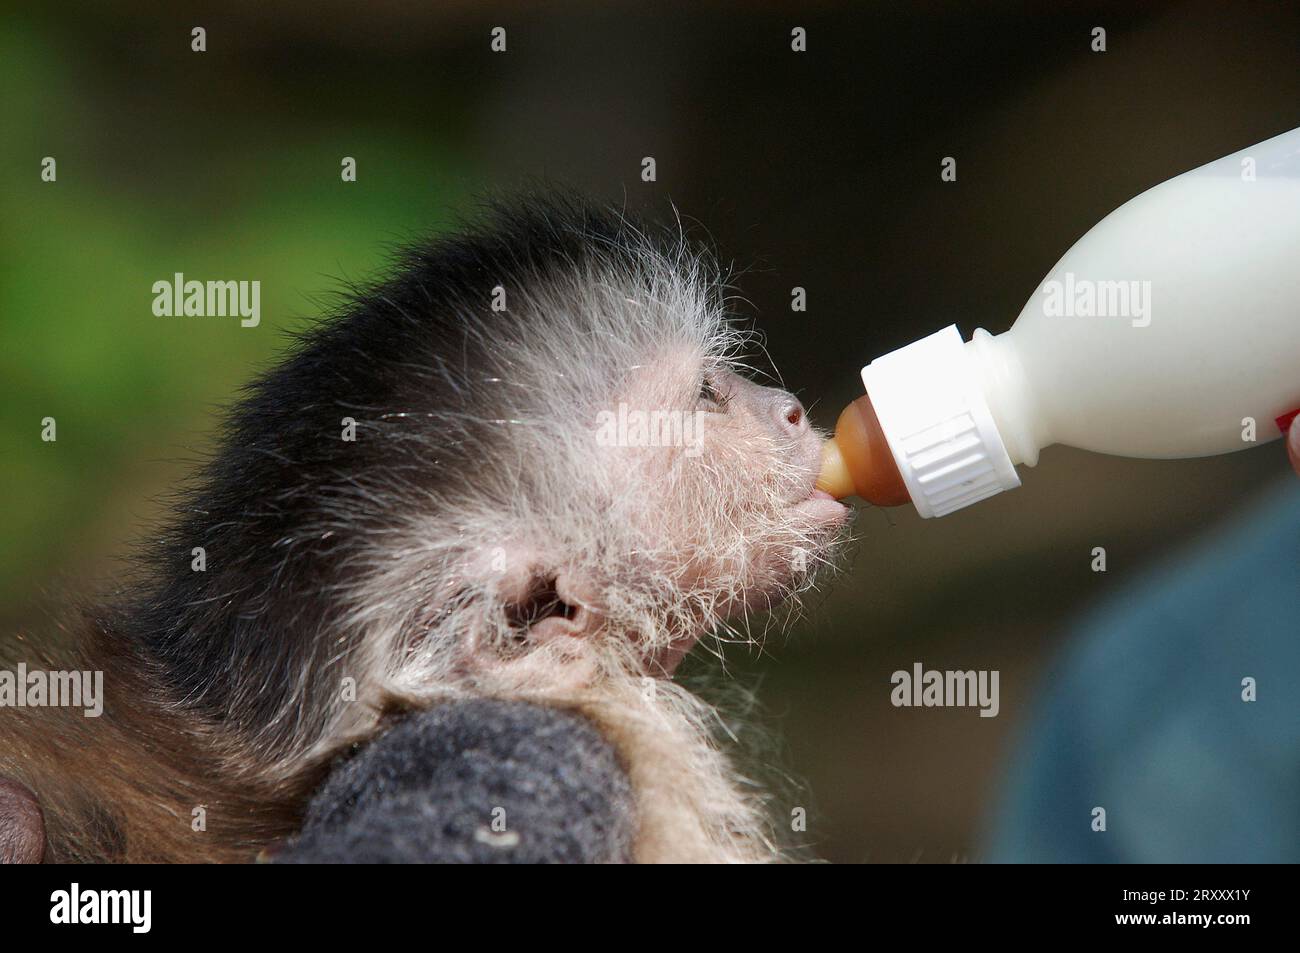 Young Brown Capuchin (Cebus apella) Monkey, hand reared Stock Photo